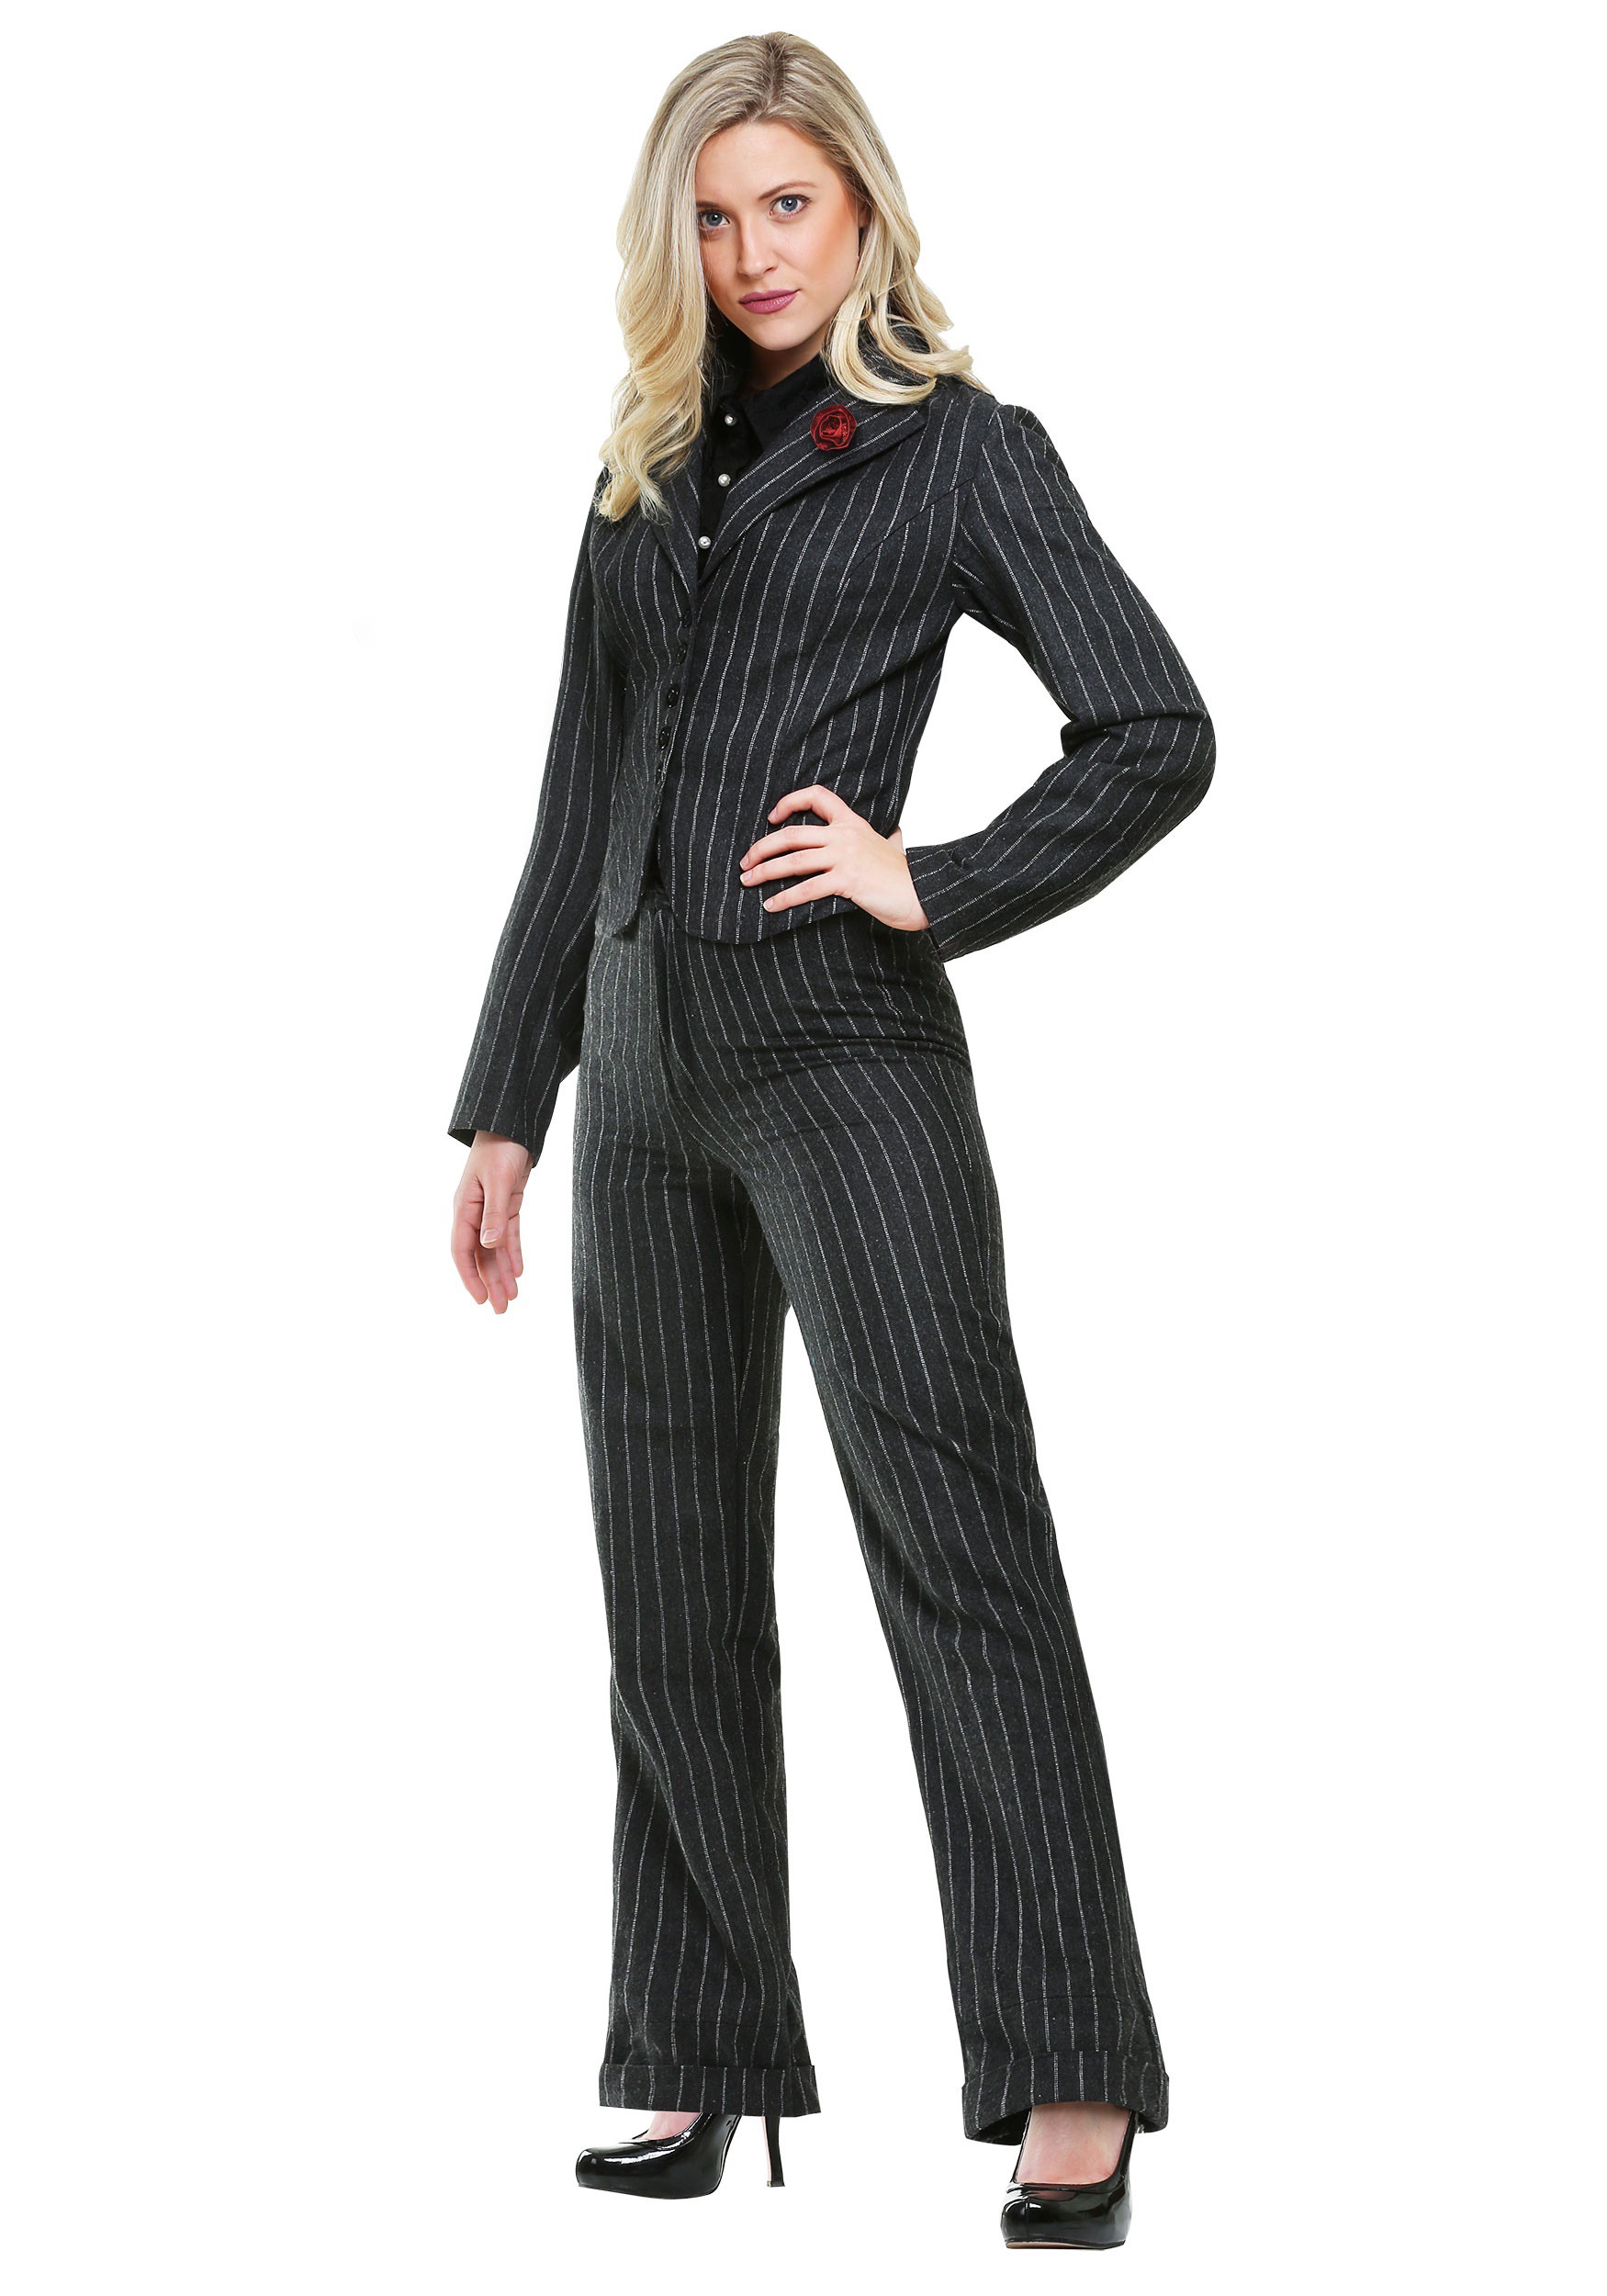 Gangster Womens Costume